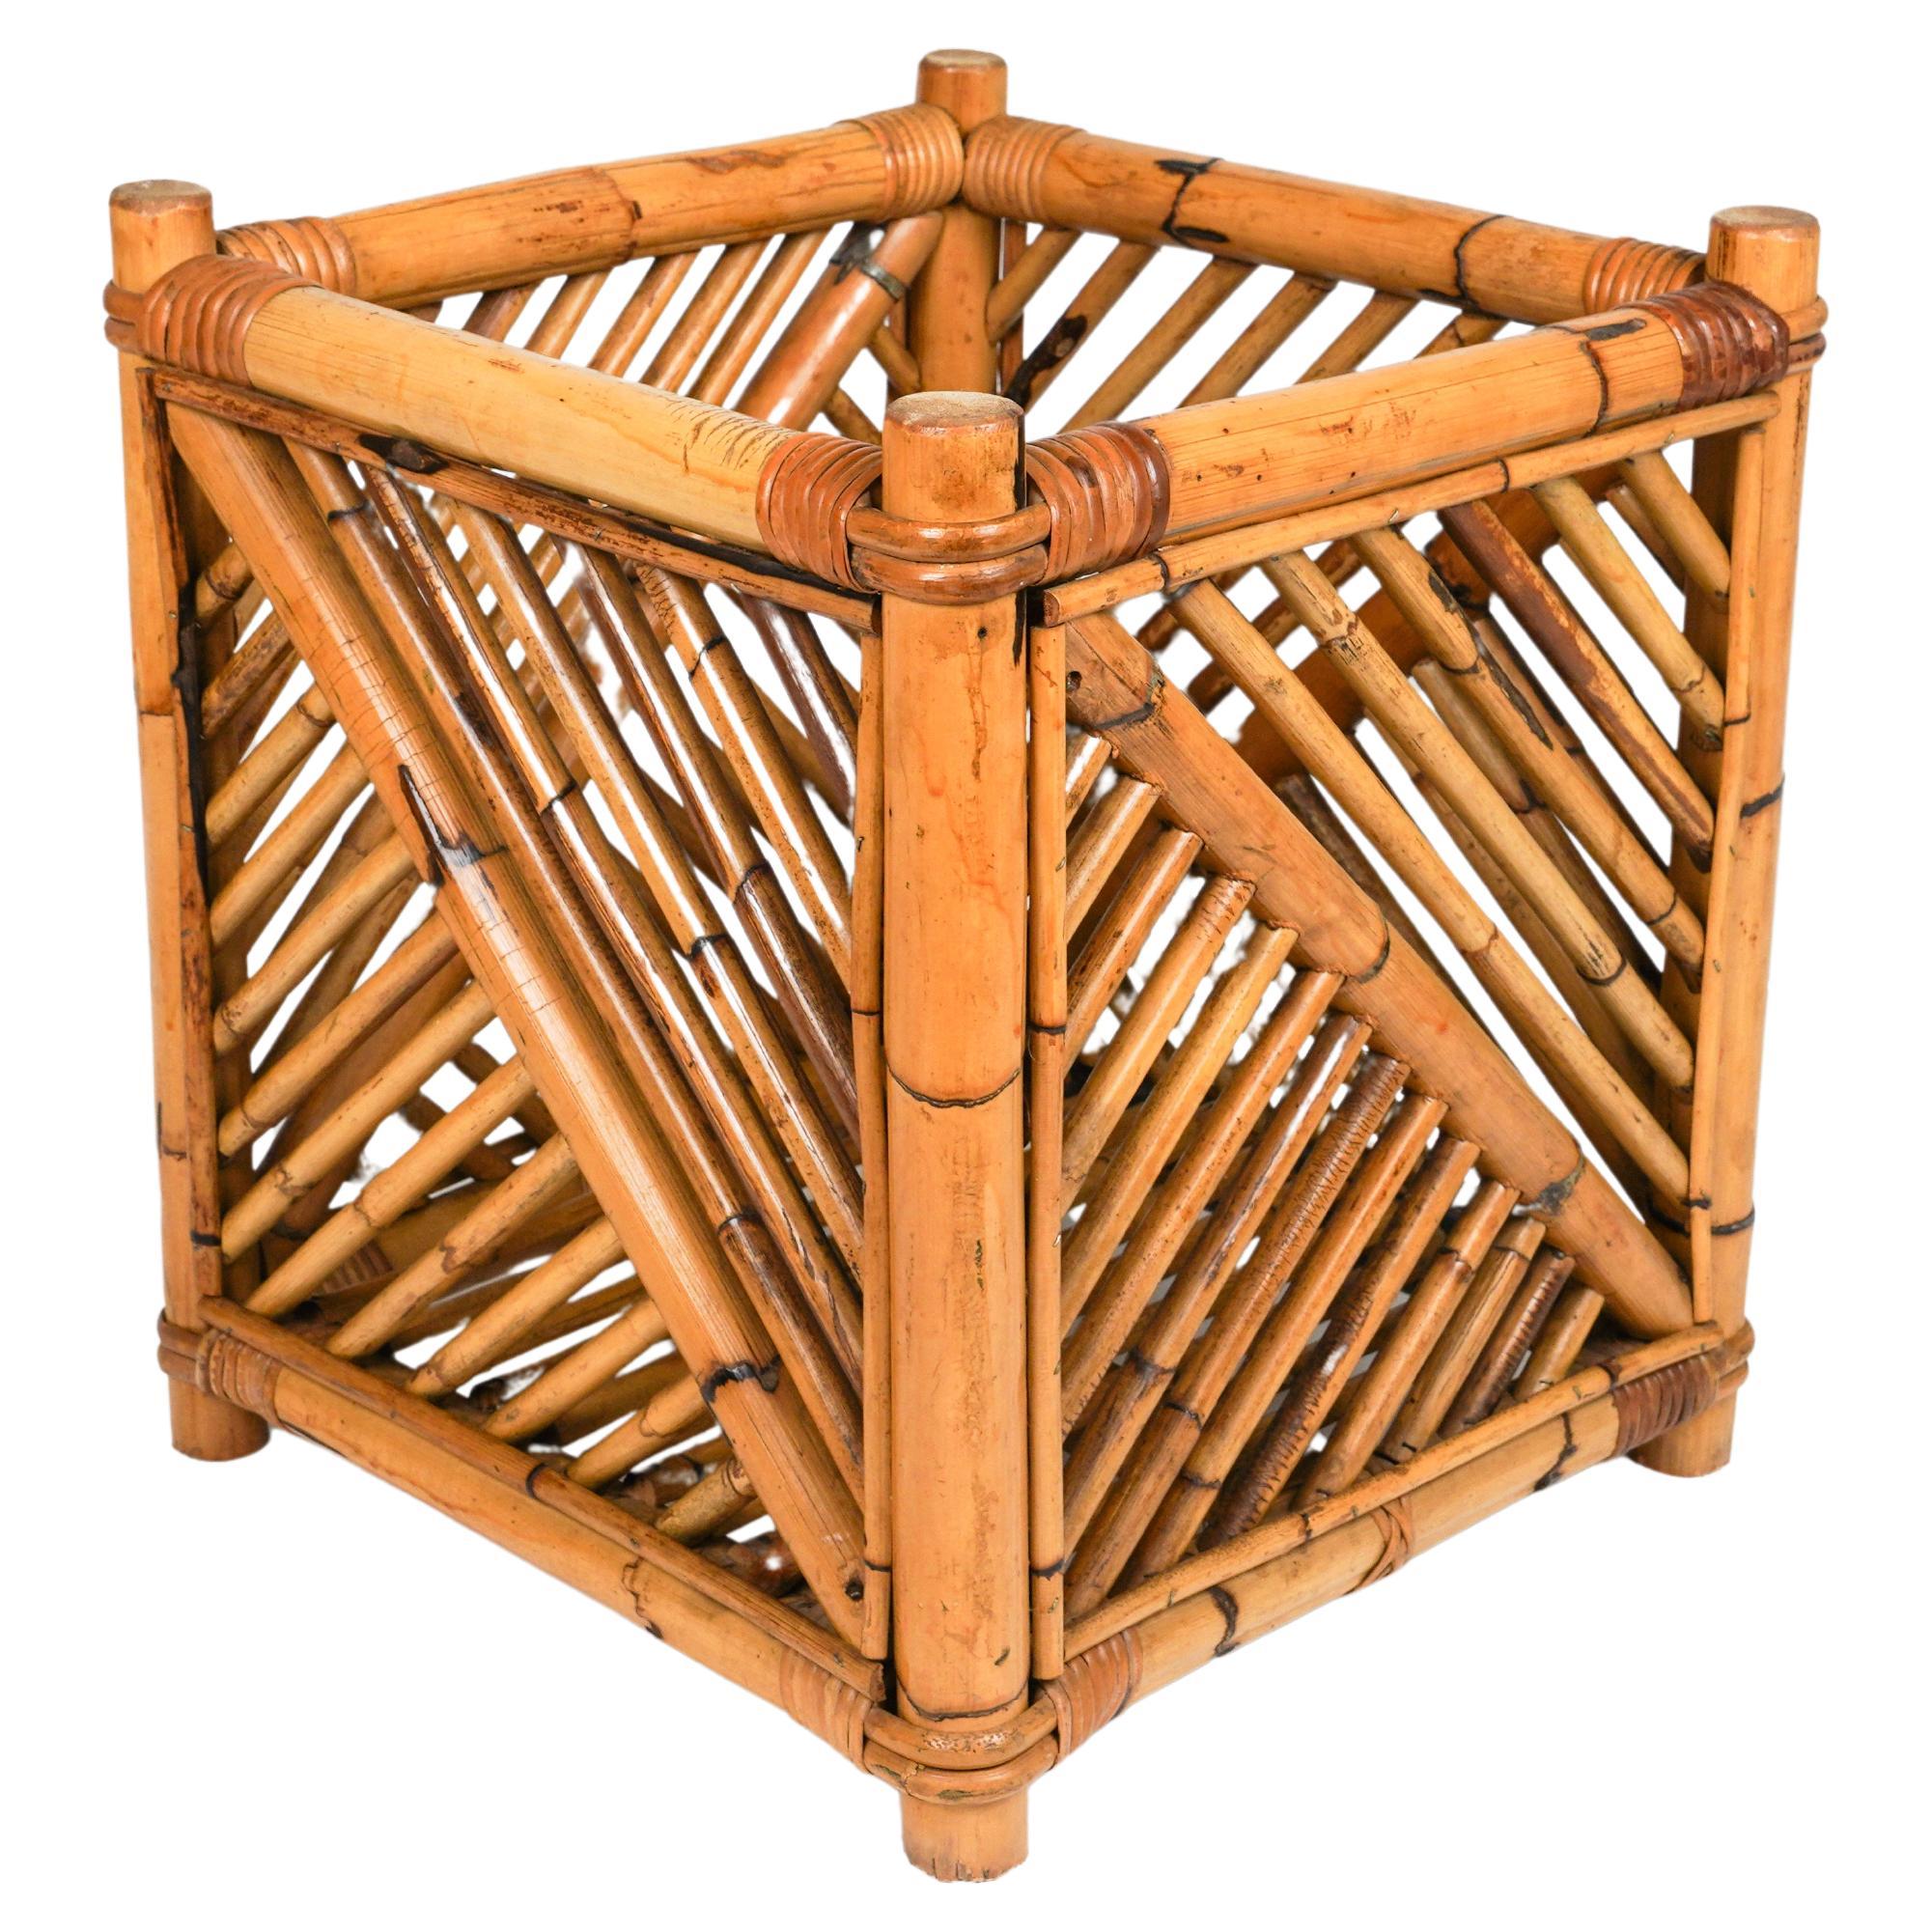 Rattan and Bamboo Plant Holder or Basket by Vivai Del Sud, Italy 1970s For Sale